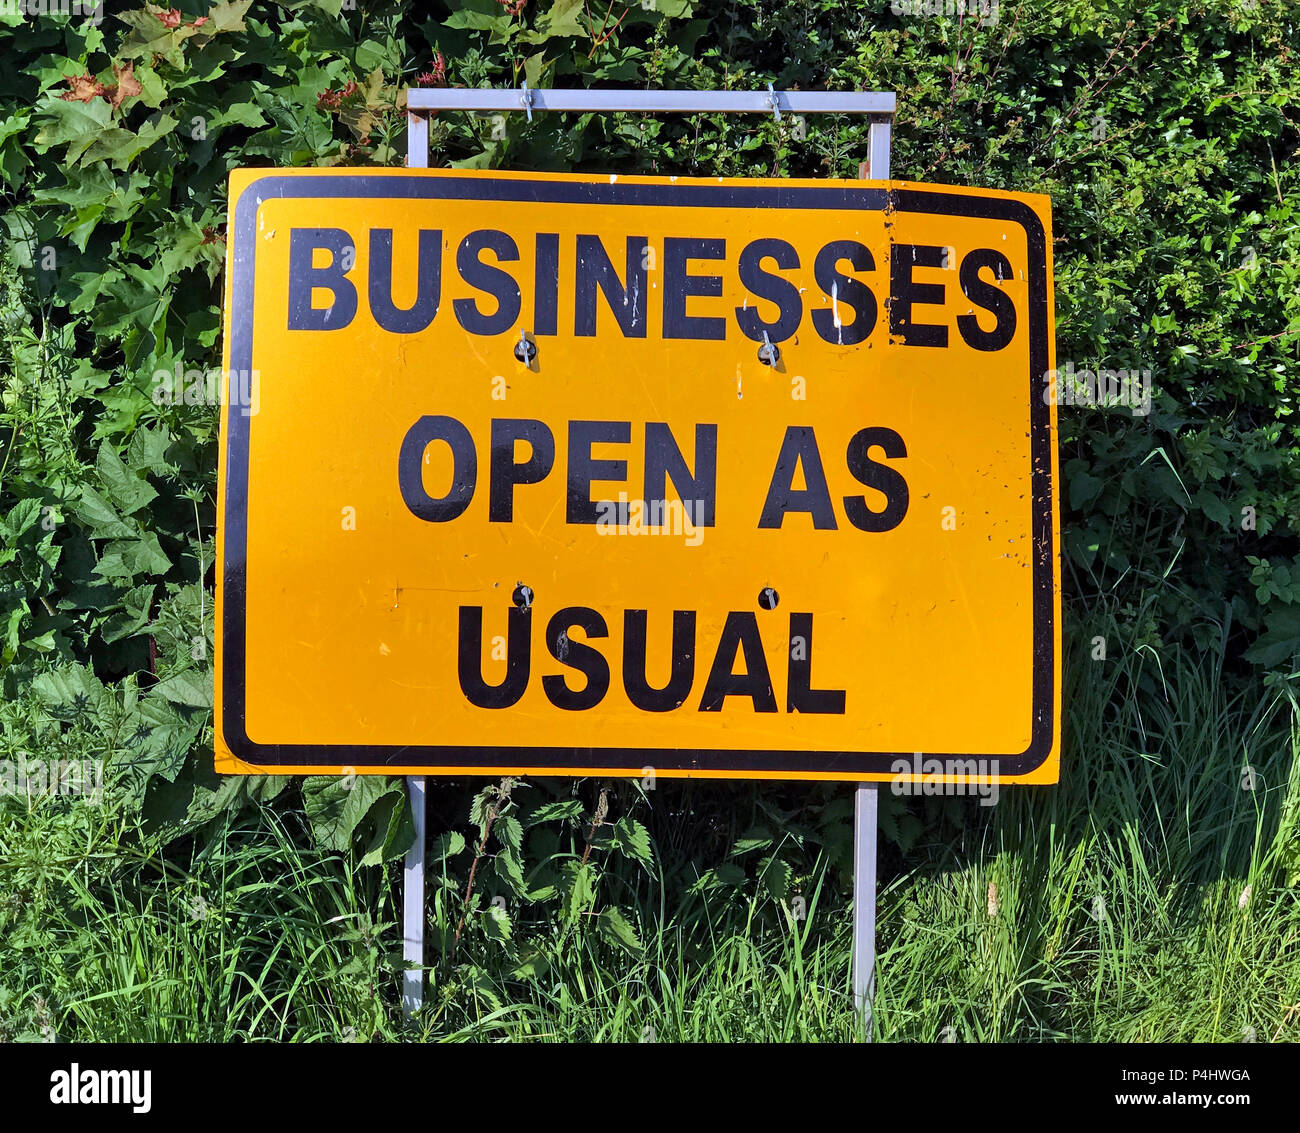 Business Open As Usual,Businesses Open as usual,sign Stock Photo